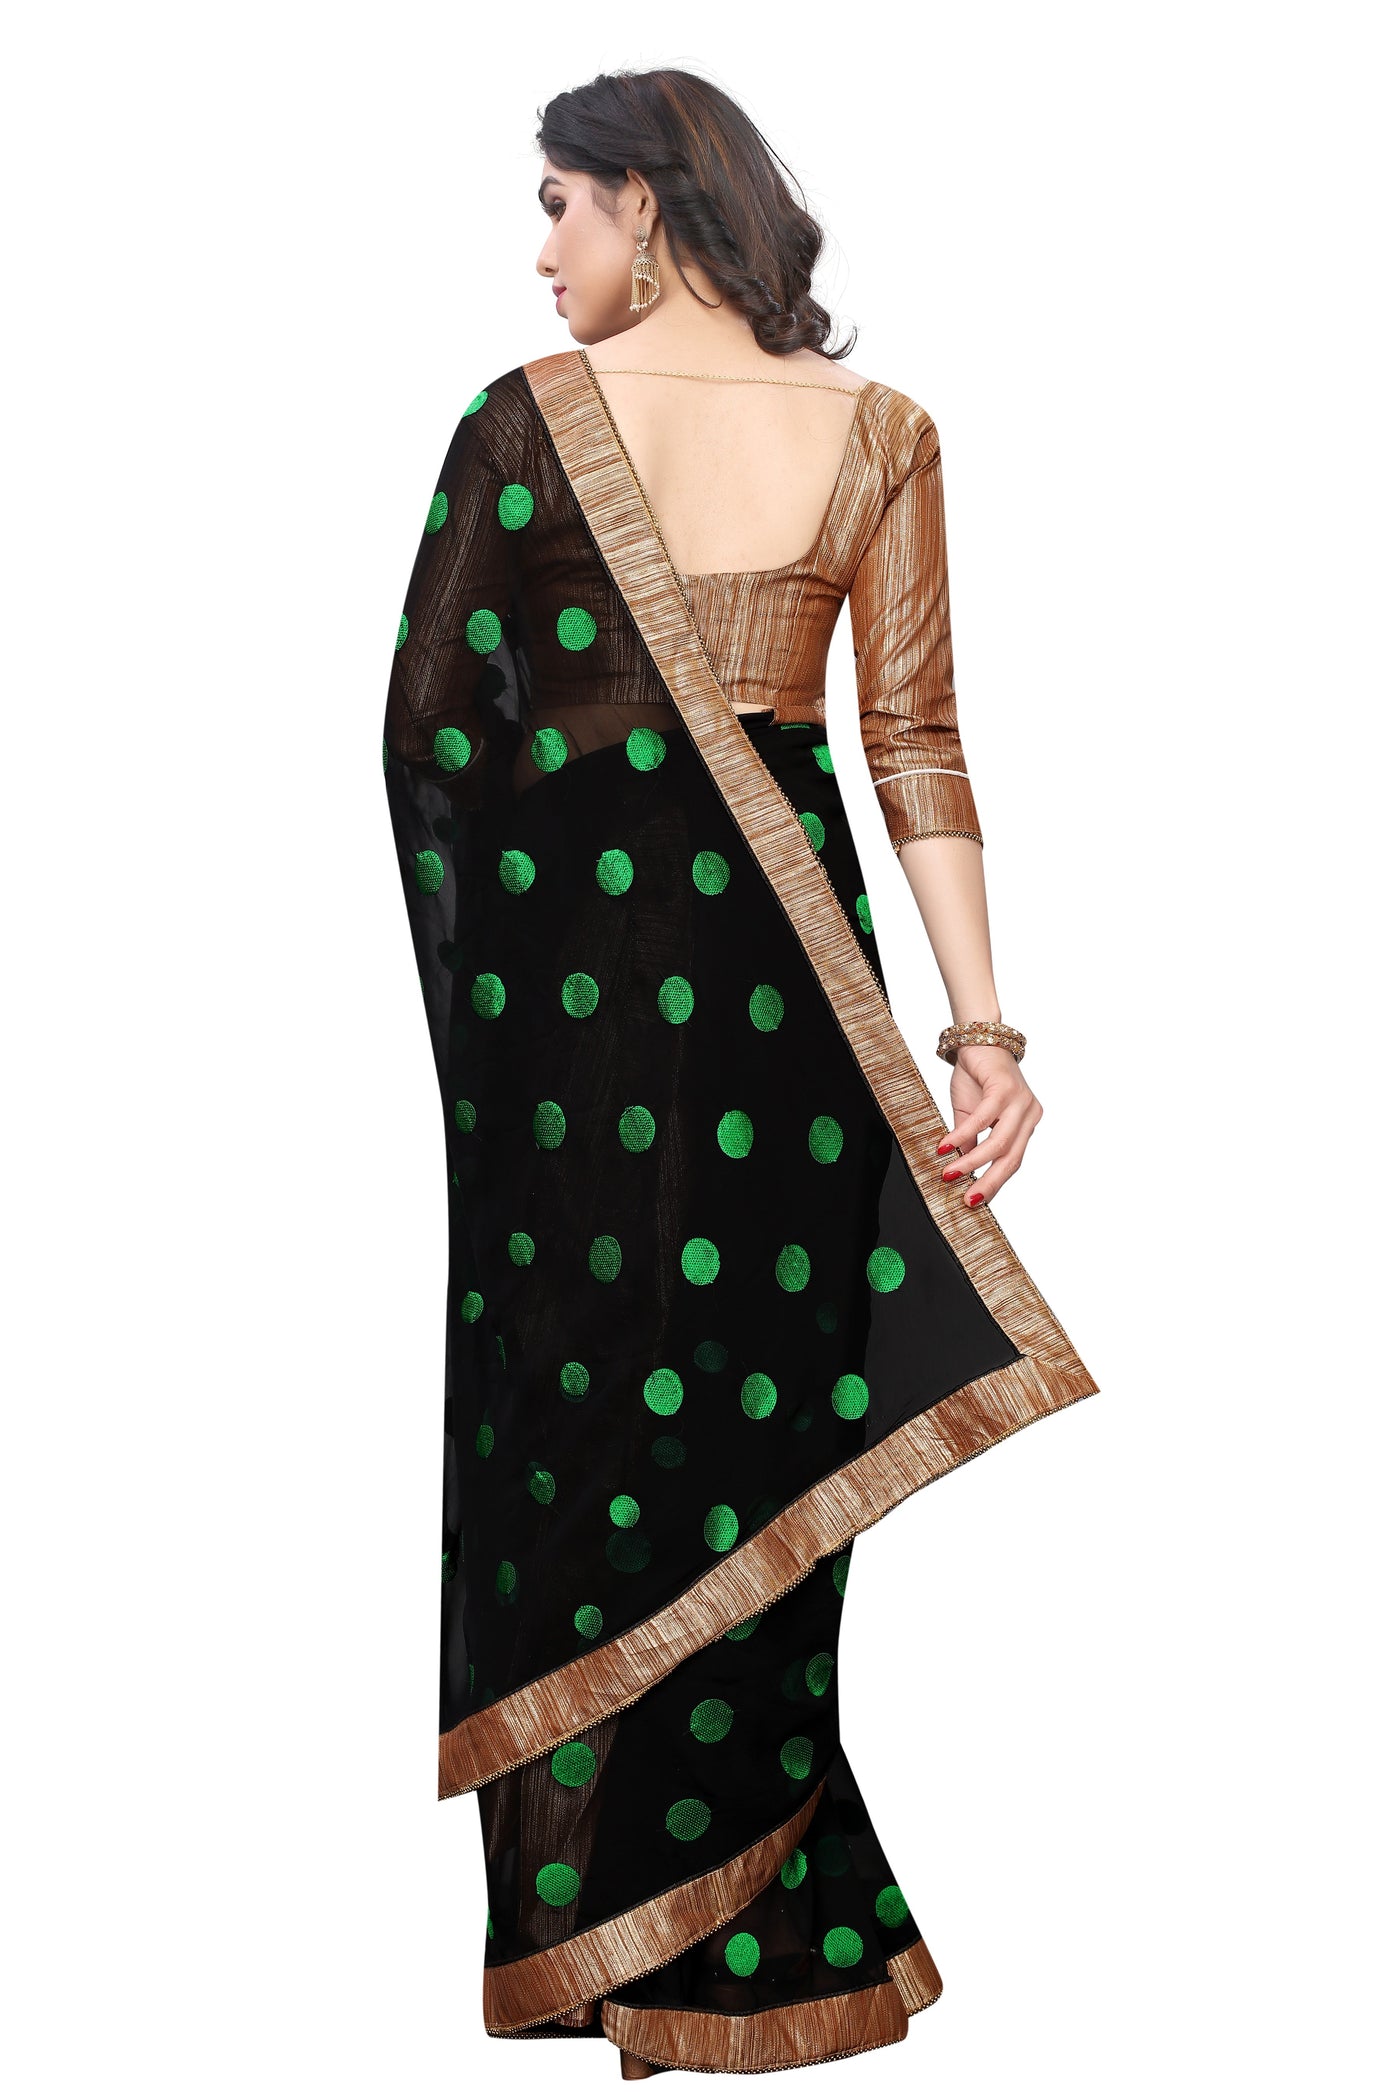 Georgette Black Saree With Blouse